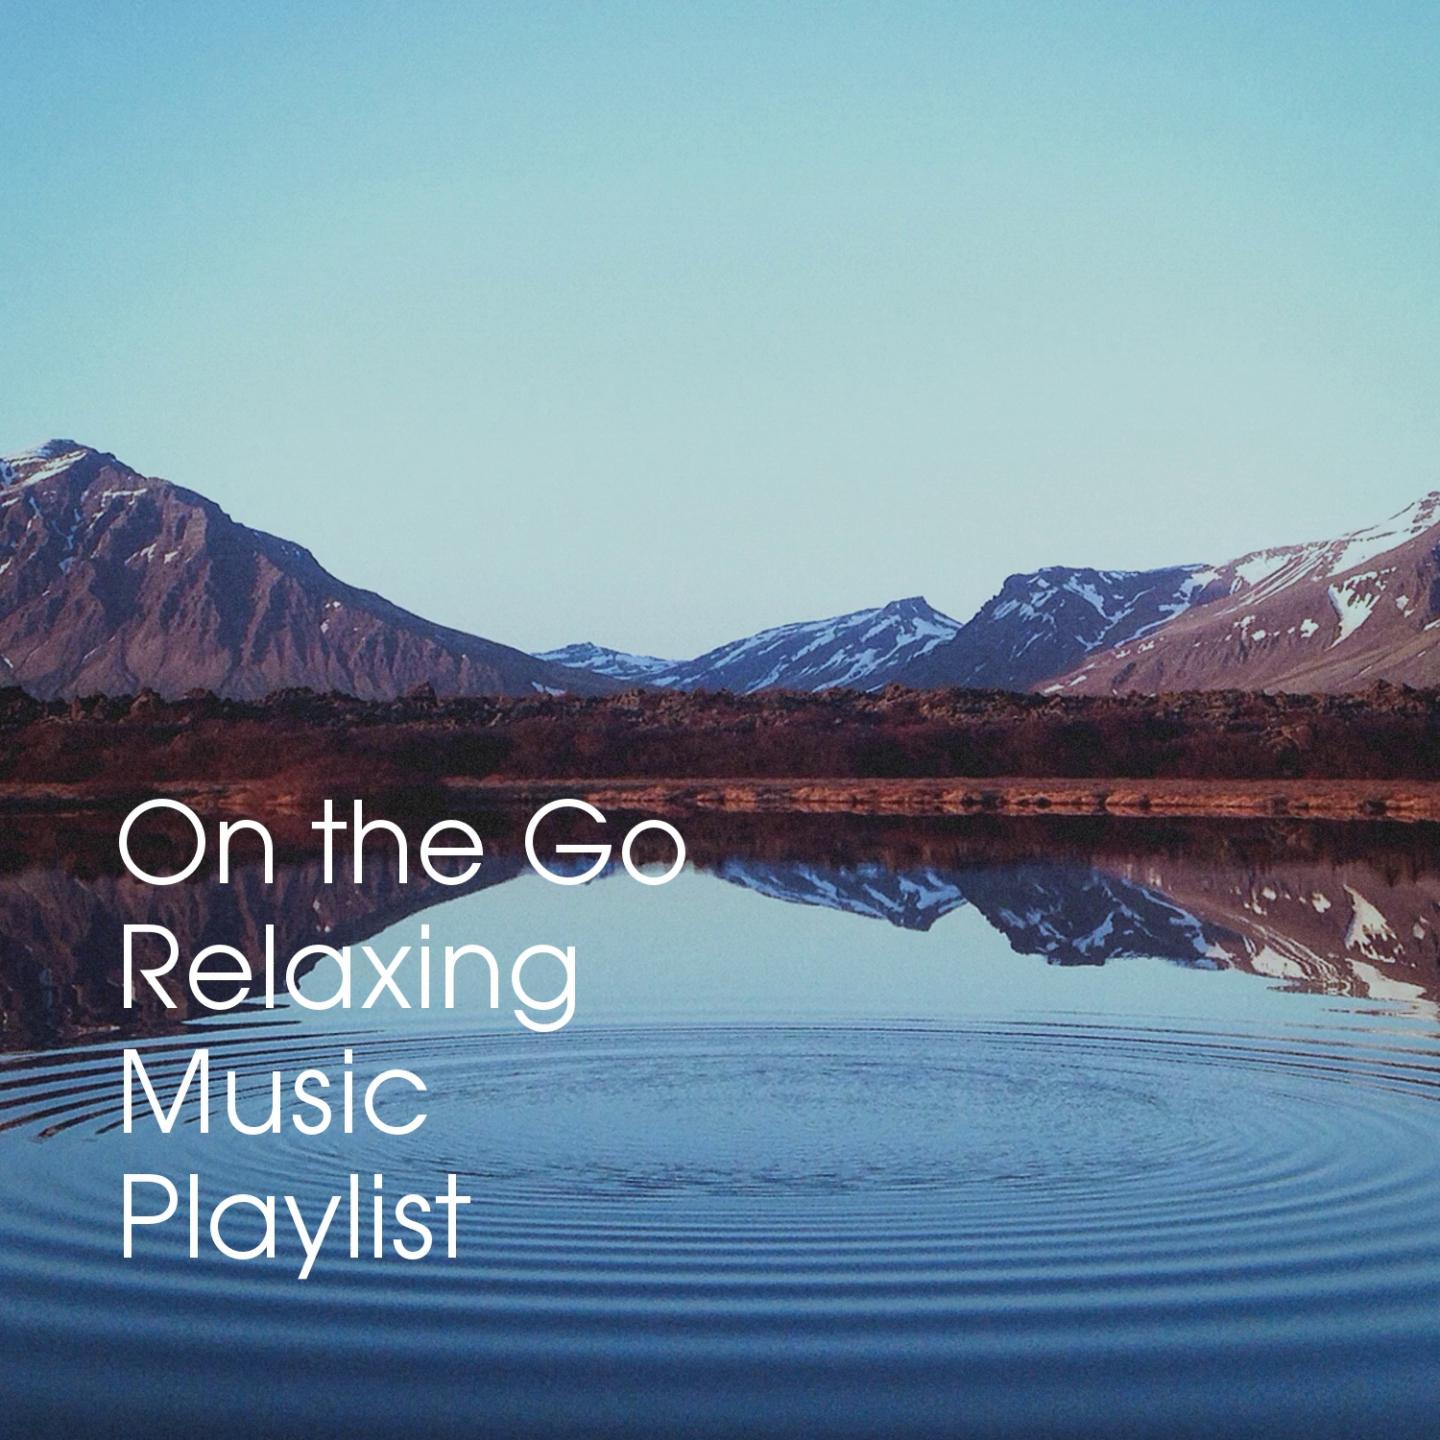 On the Go Relaxing Music Playlist